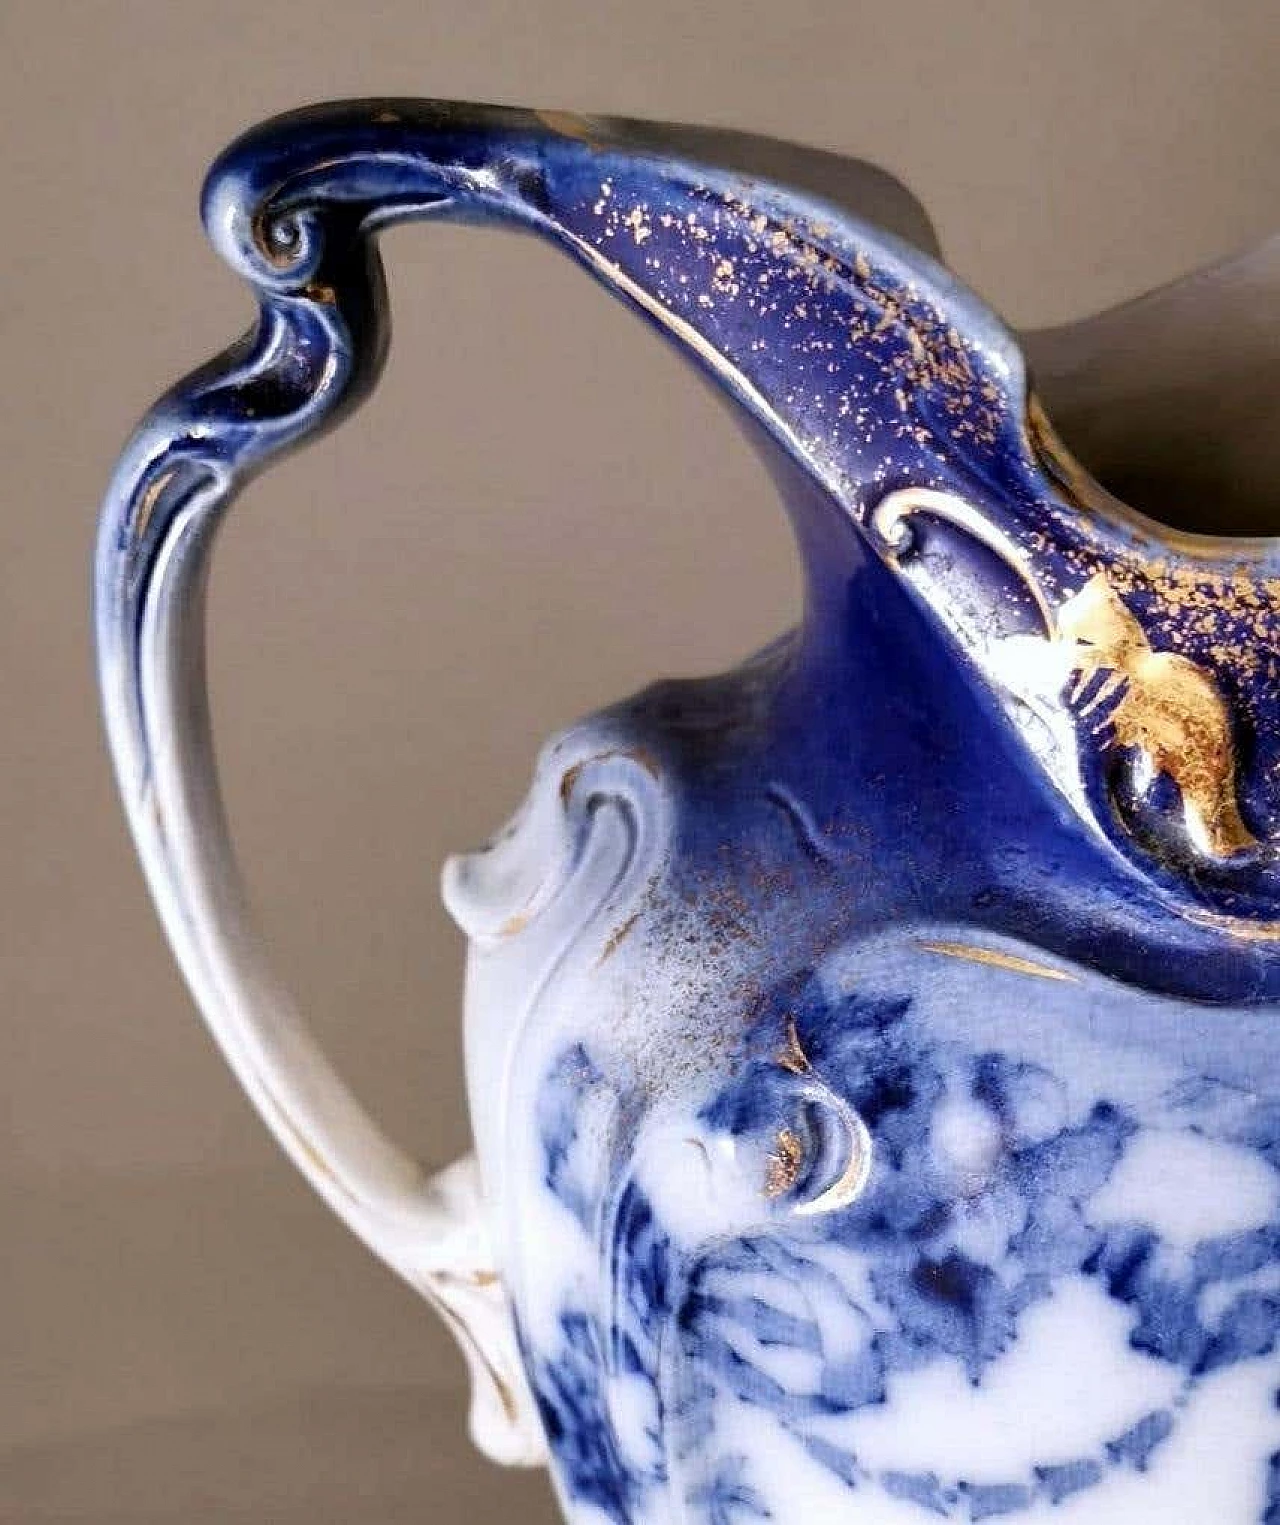 Victorian-style jug in white, blue and gold porcelain, late 19th century 9